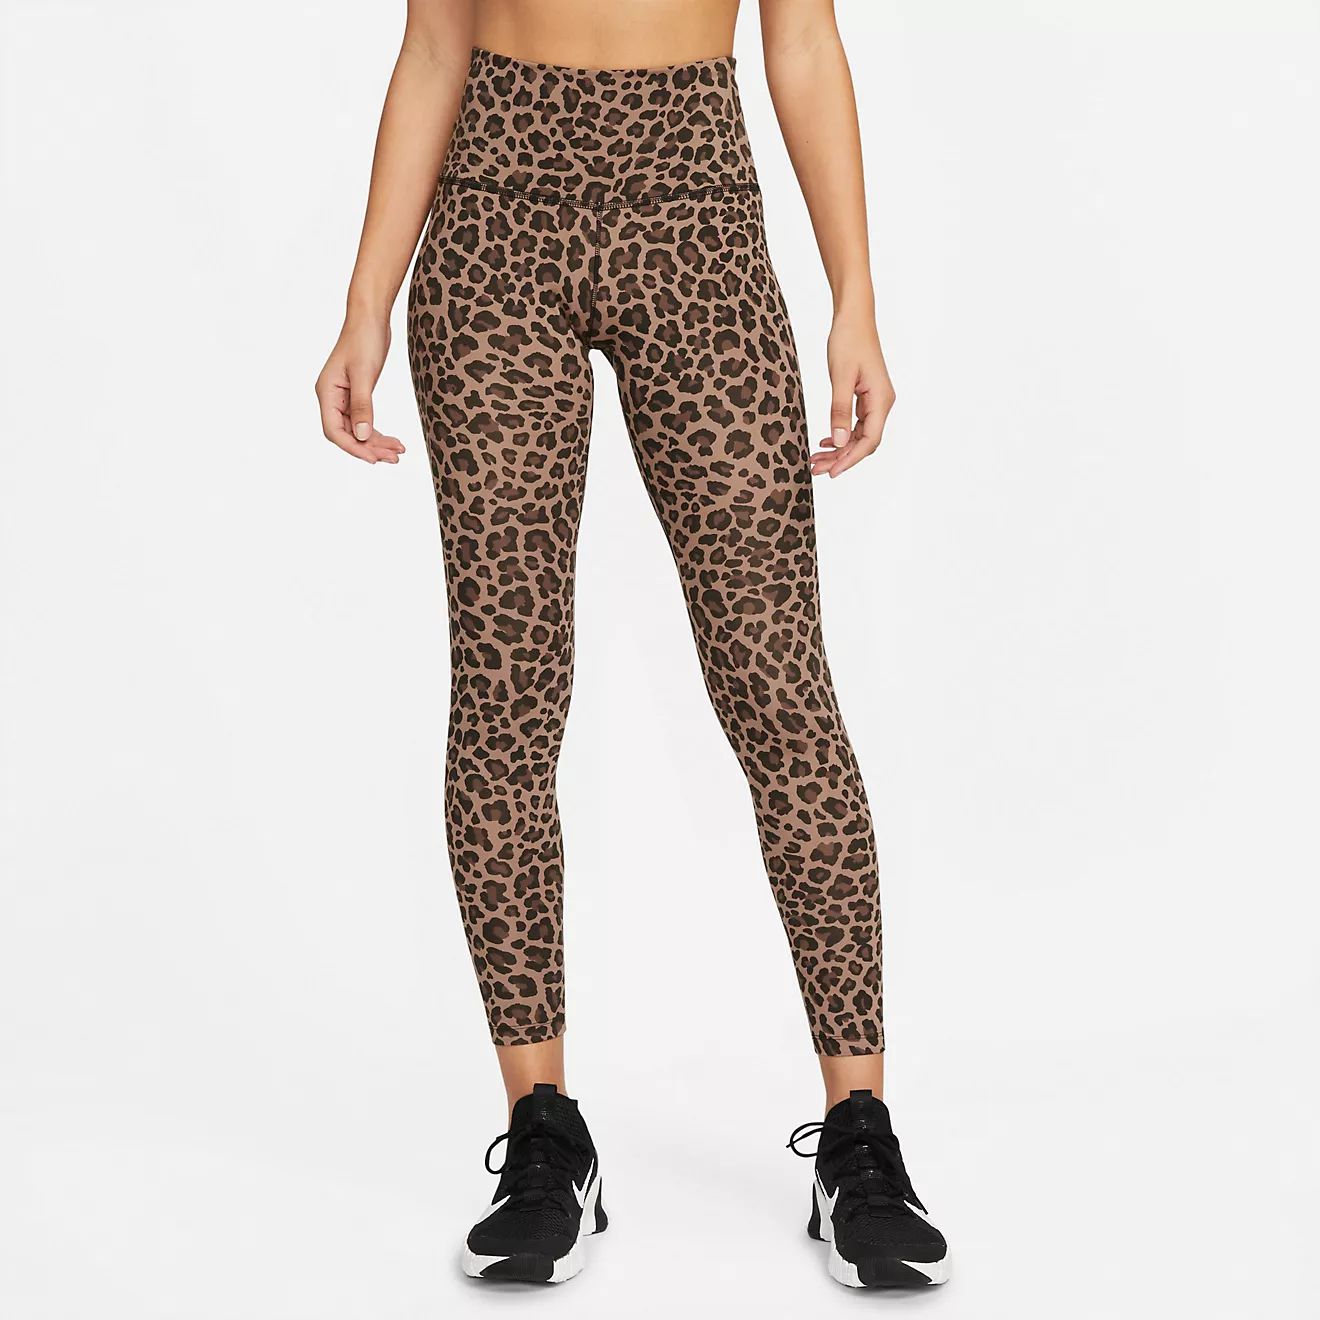 Nike Women's Dri-FIT One High-Rise Leopard Tights | Academy Sports + Outdoors